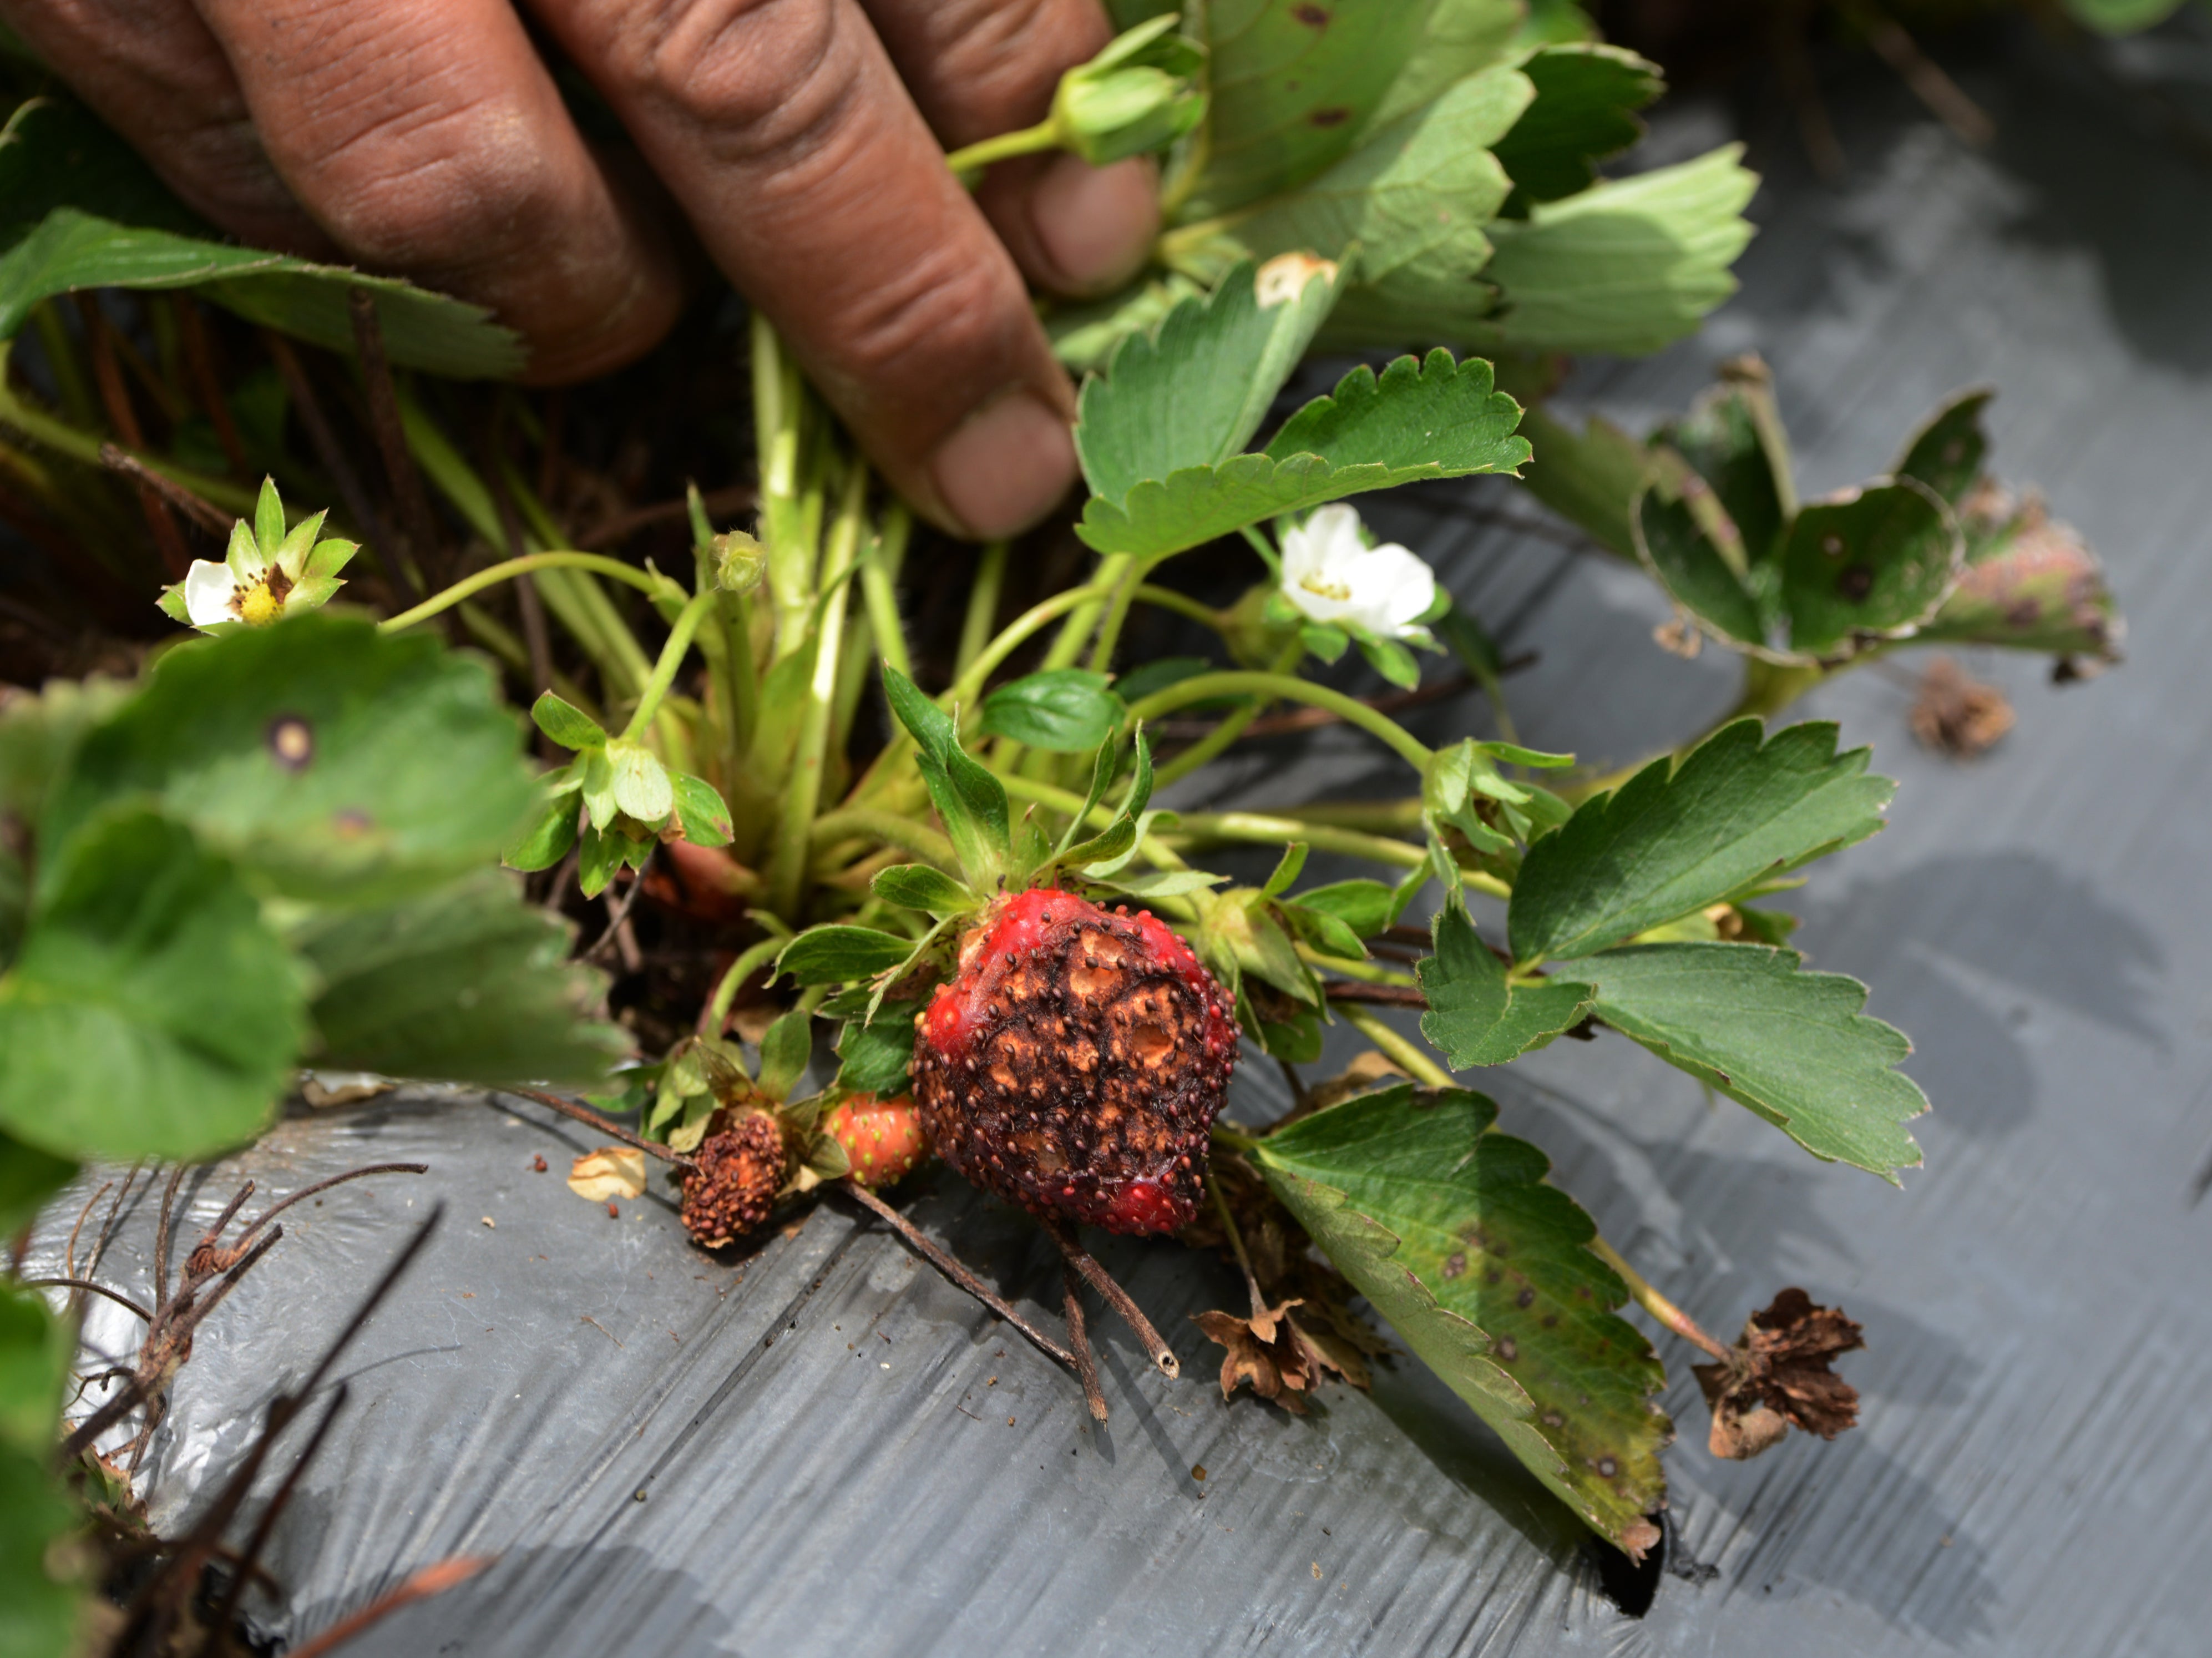 Pictured: A farmer in Honduras checks his strawberries for a fungus whose spread is being driven by climate breakdown